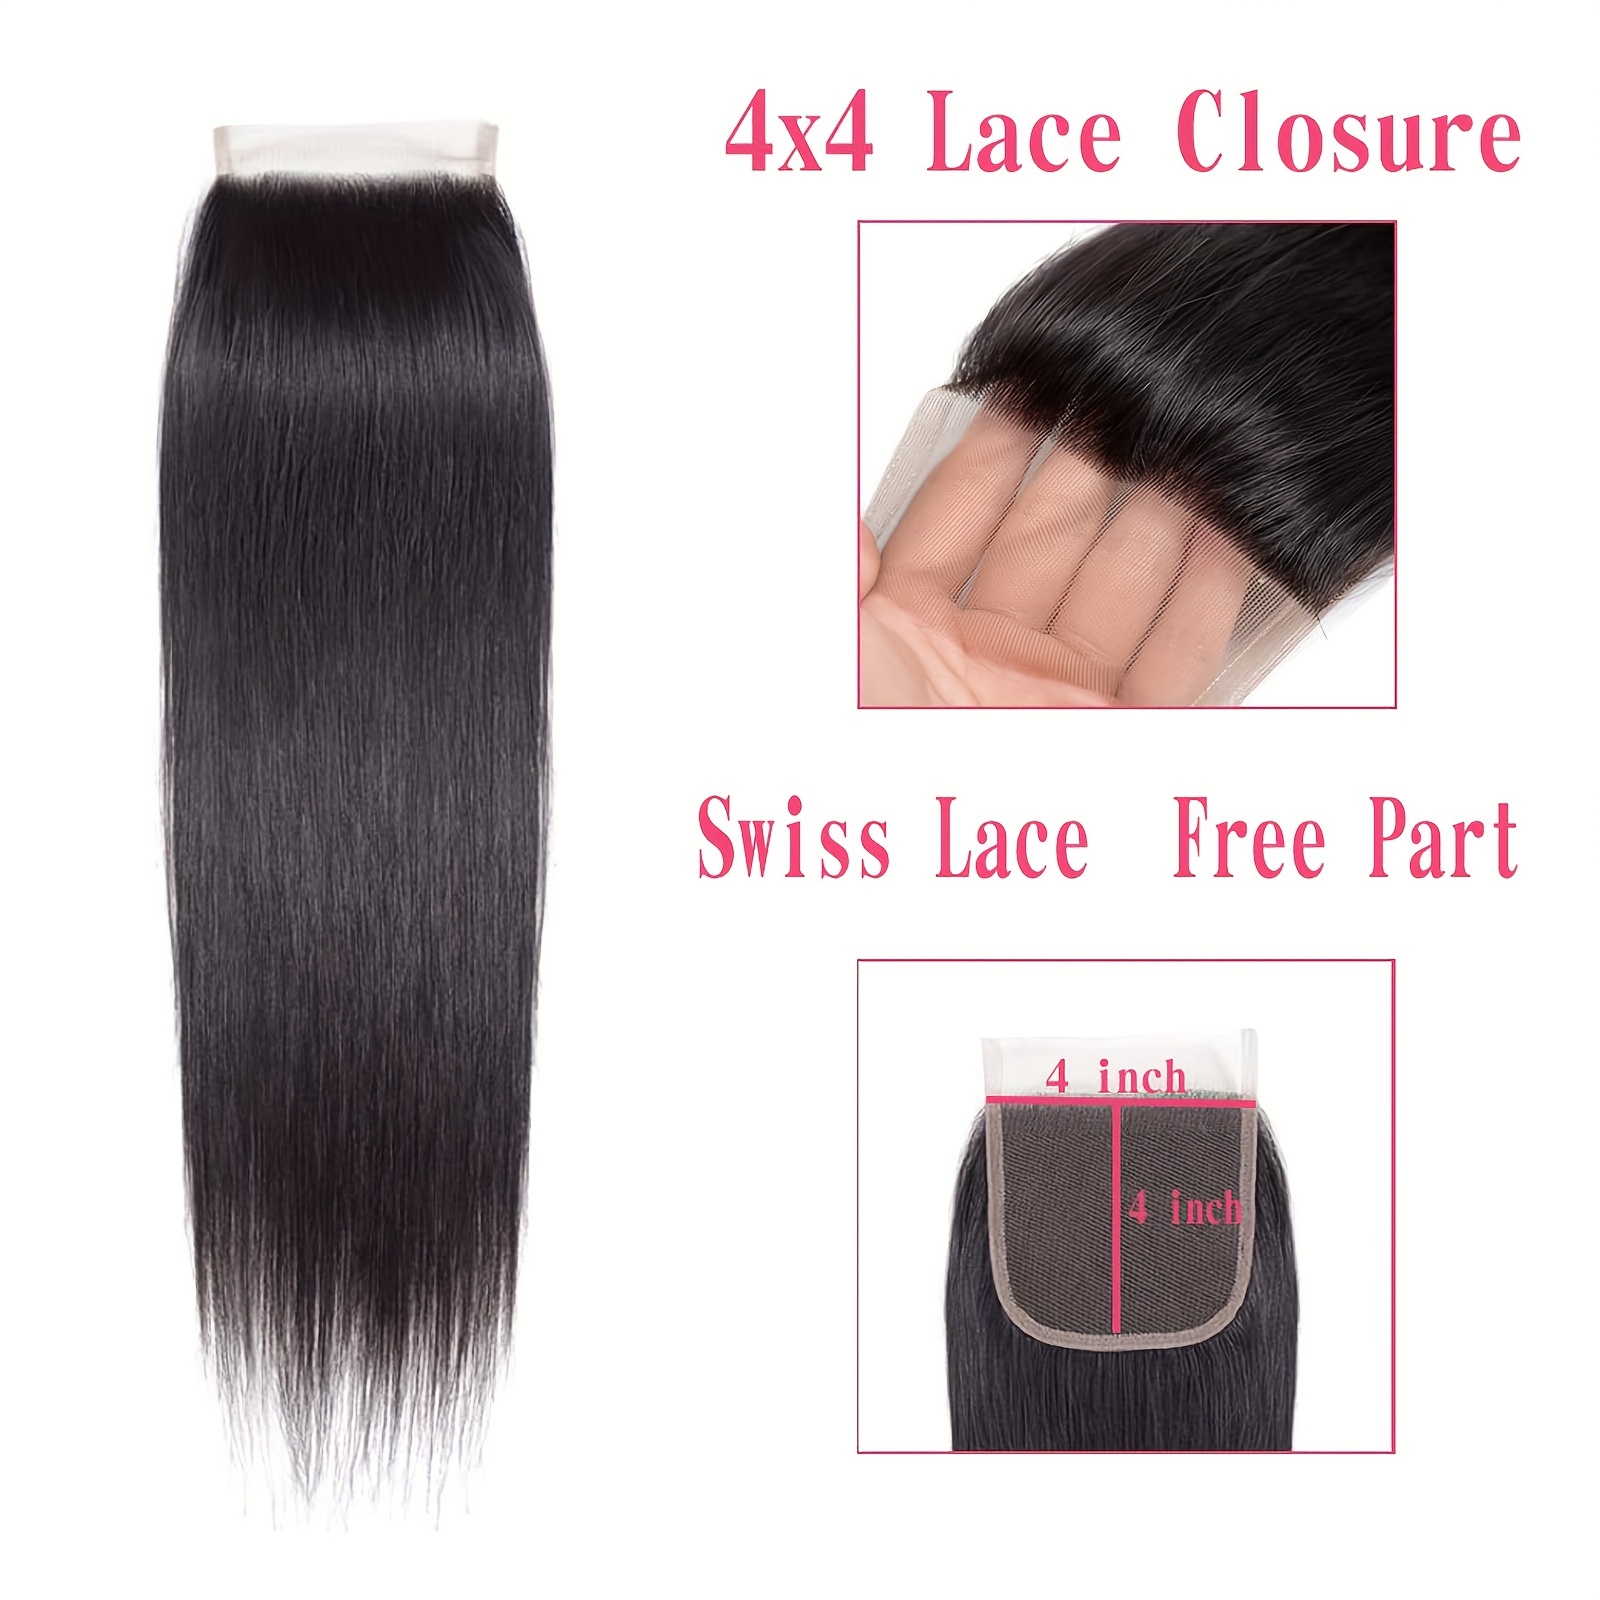 Lace Closures & Frontals – Buy Lace Closures & Frontals with free